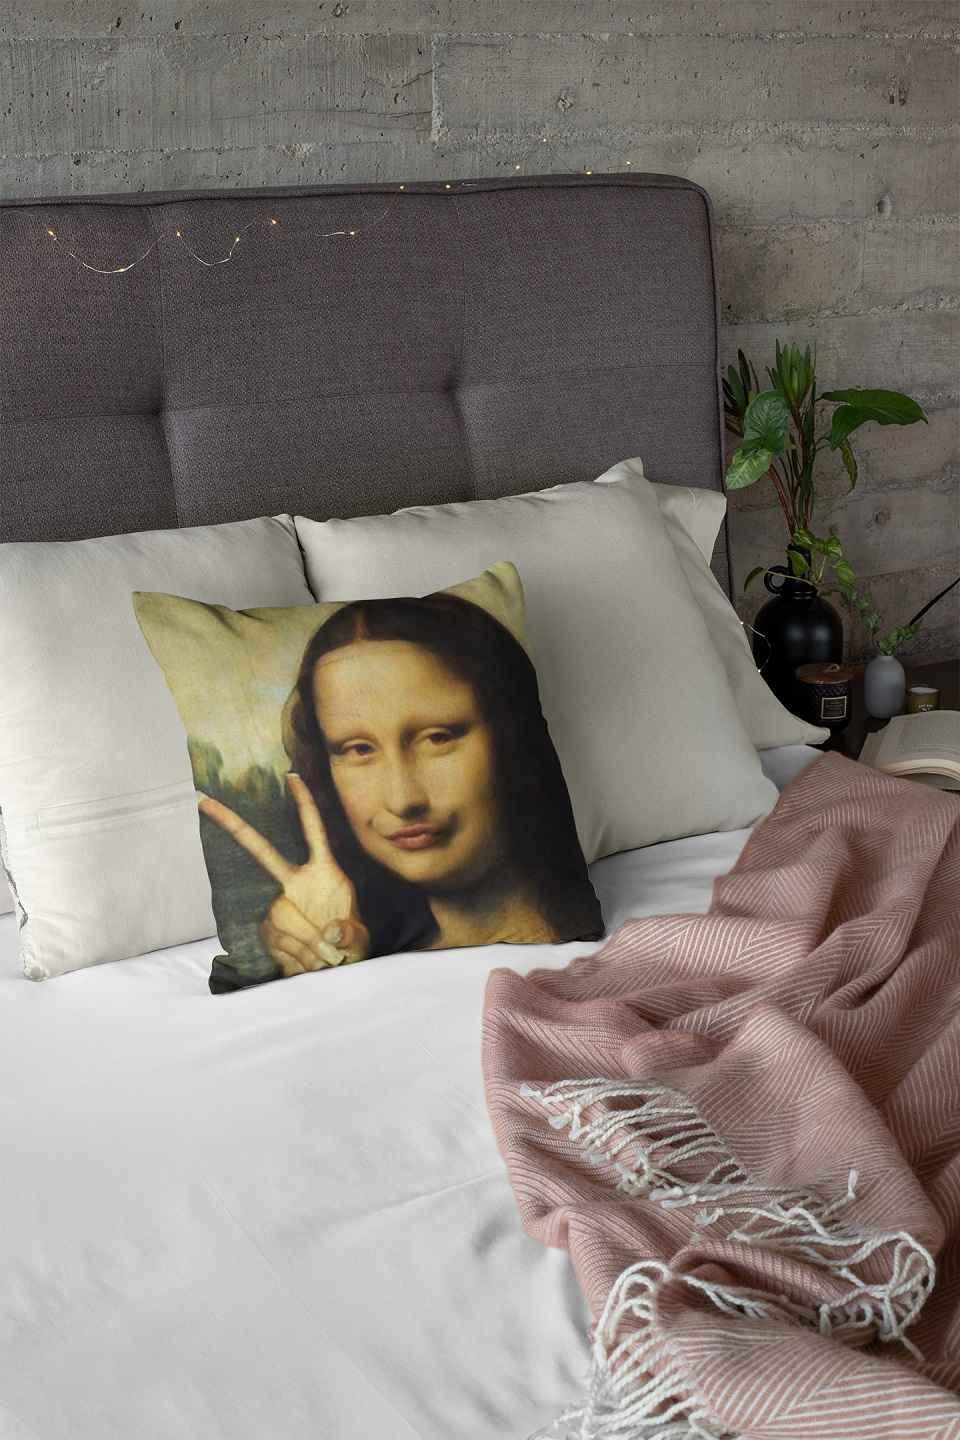 A Mona Lisa meme on a bed with a white duvet.